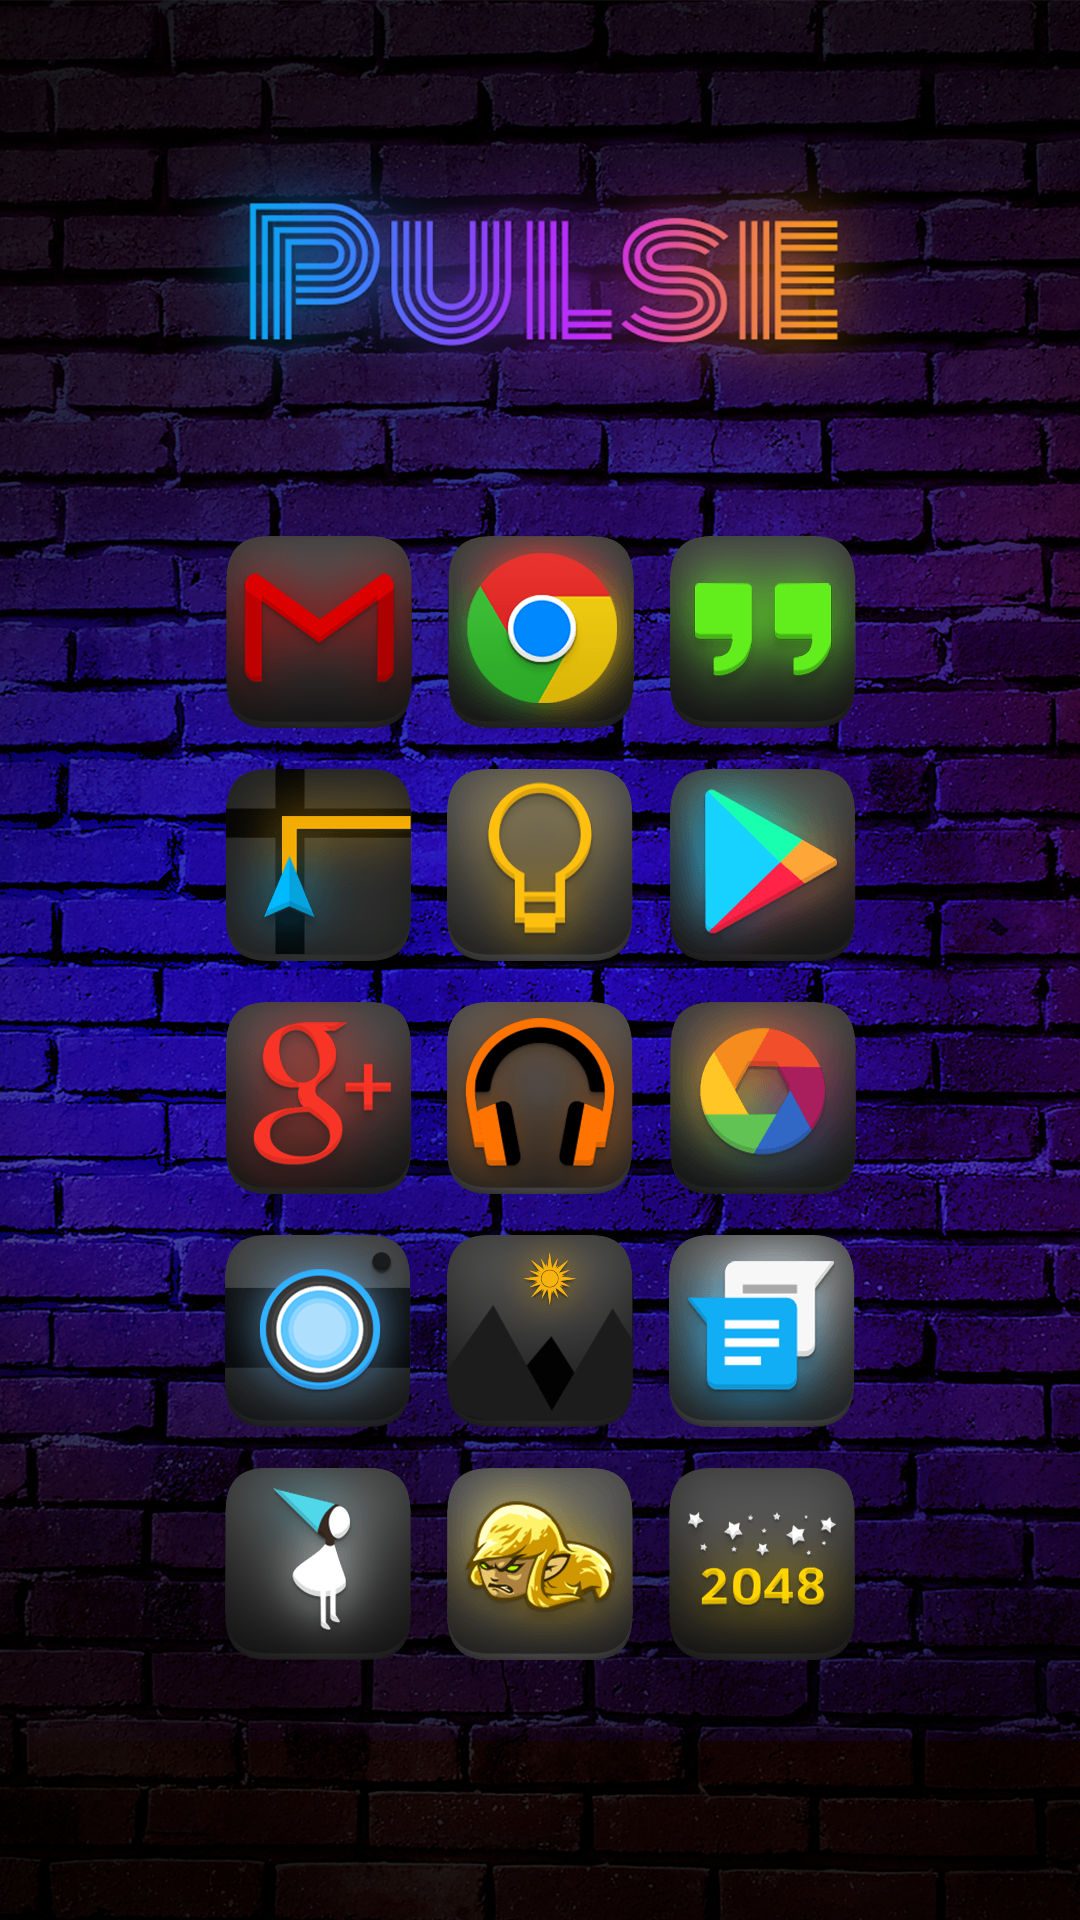 Android application Pulse - Icon Pack screenshort